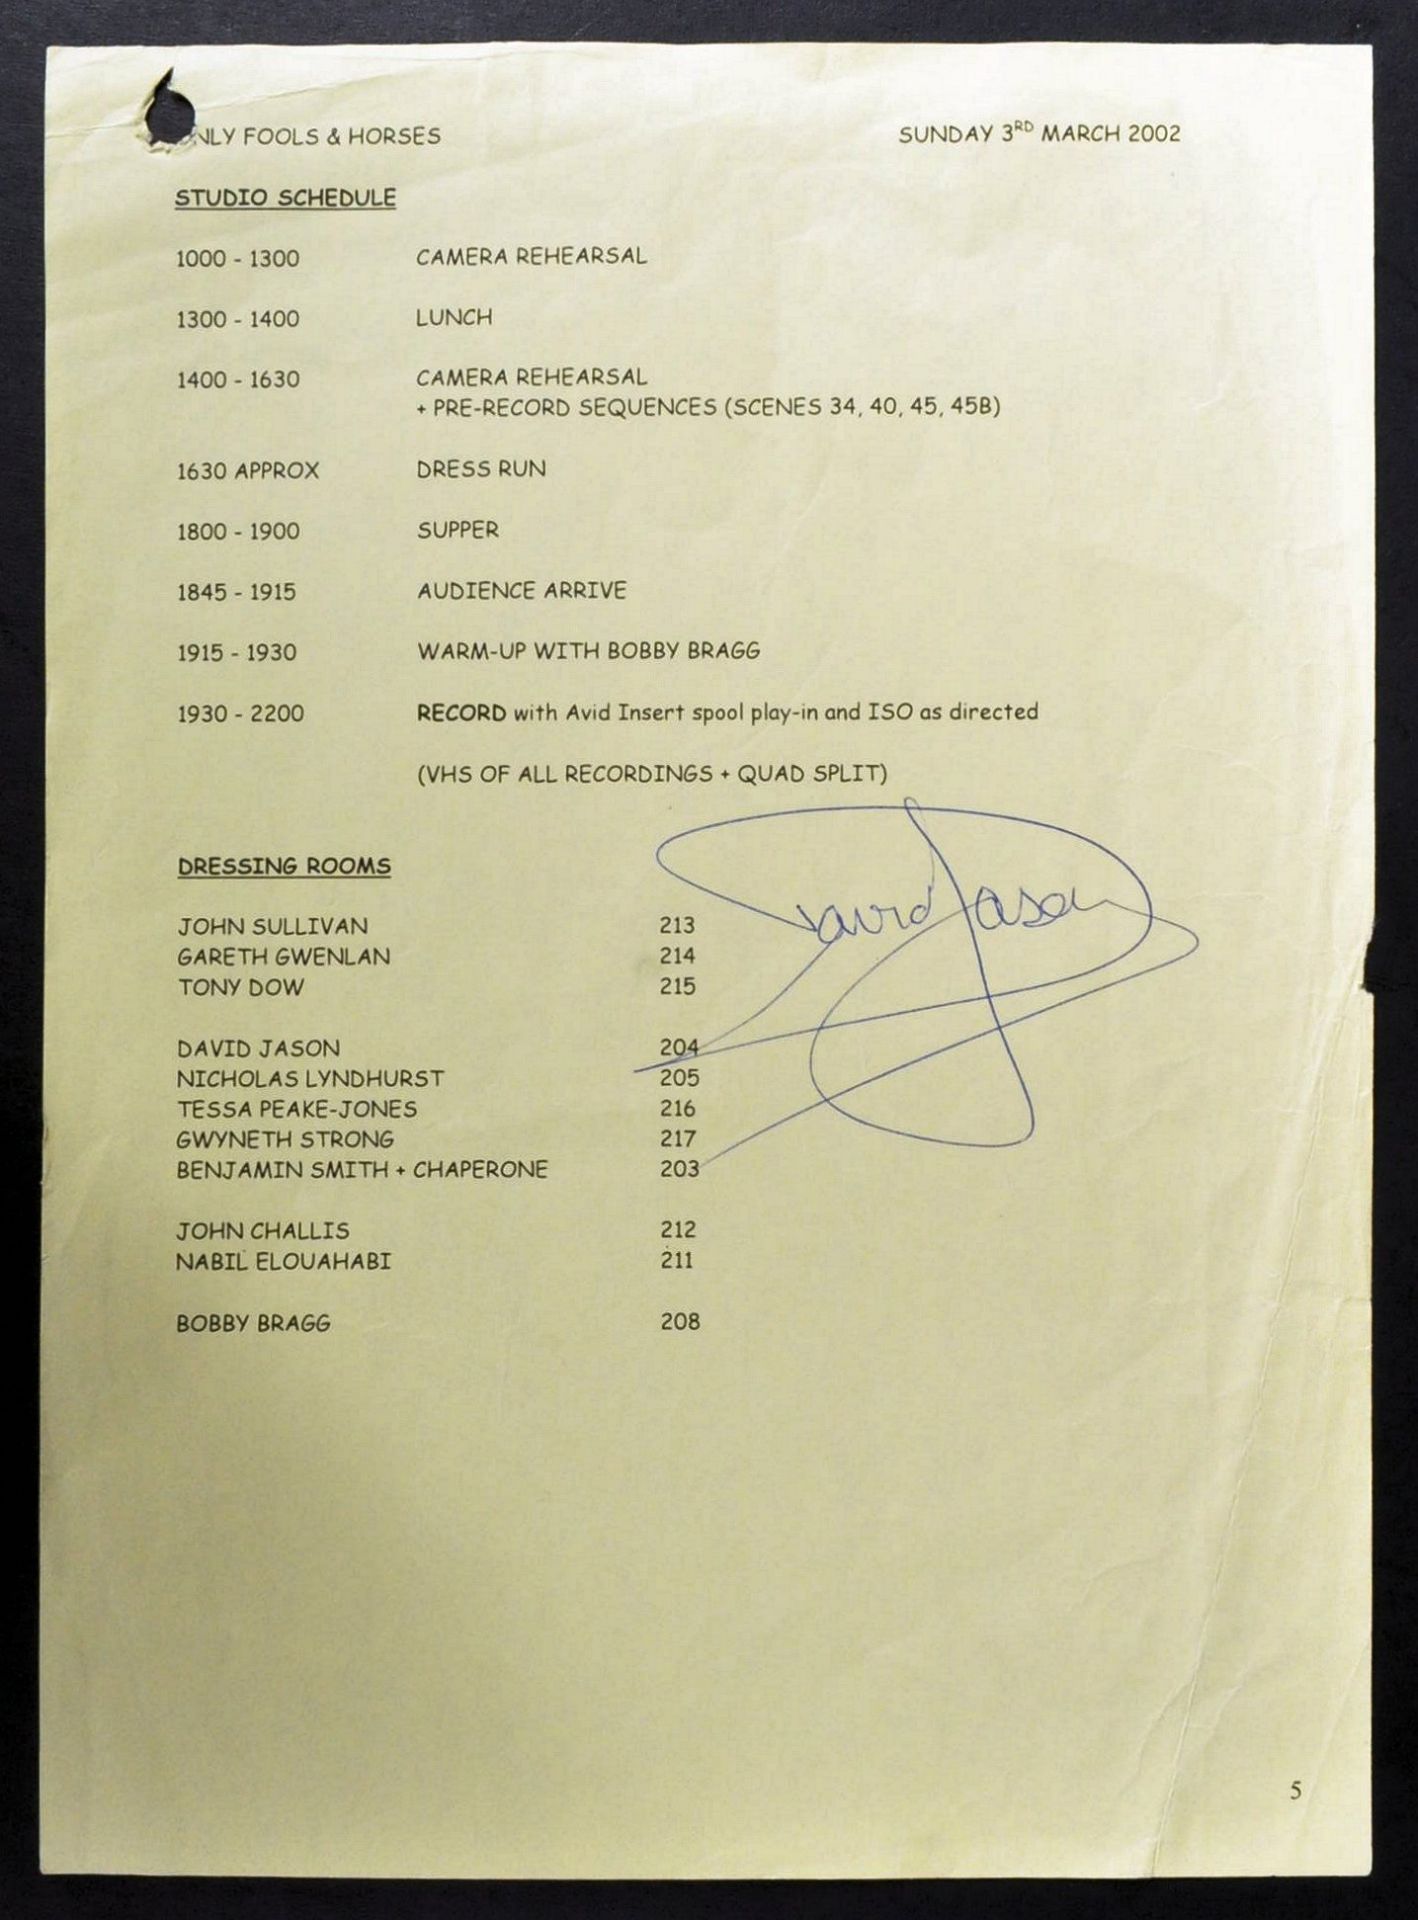 ONLY FOOLS & HORSES - STRANGERS ON THE SHORE - SIGNED STUDIO SCHEDULE